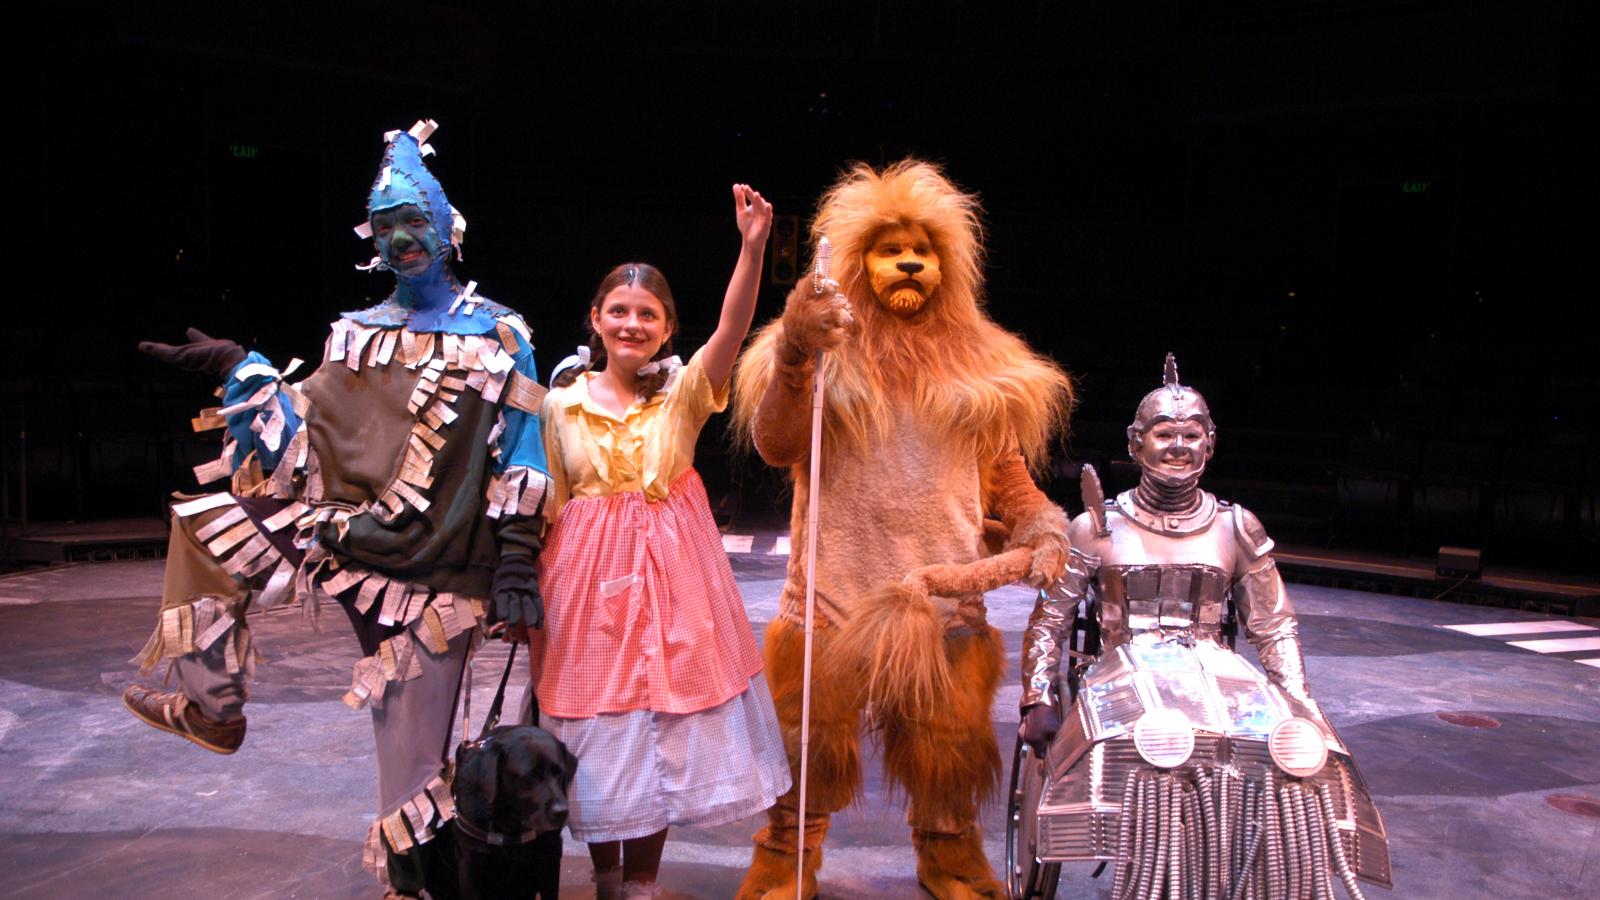 Four disabled performers dressed as Wizard of Oz characters